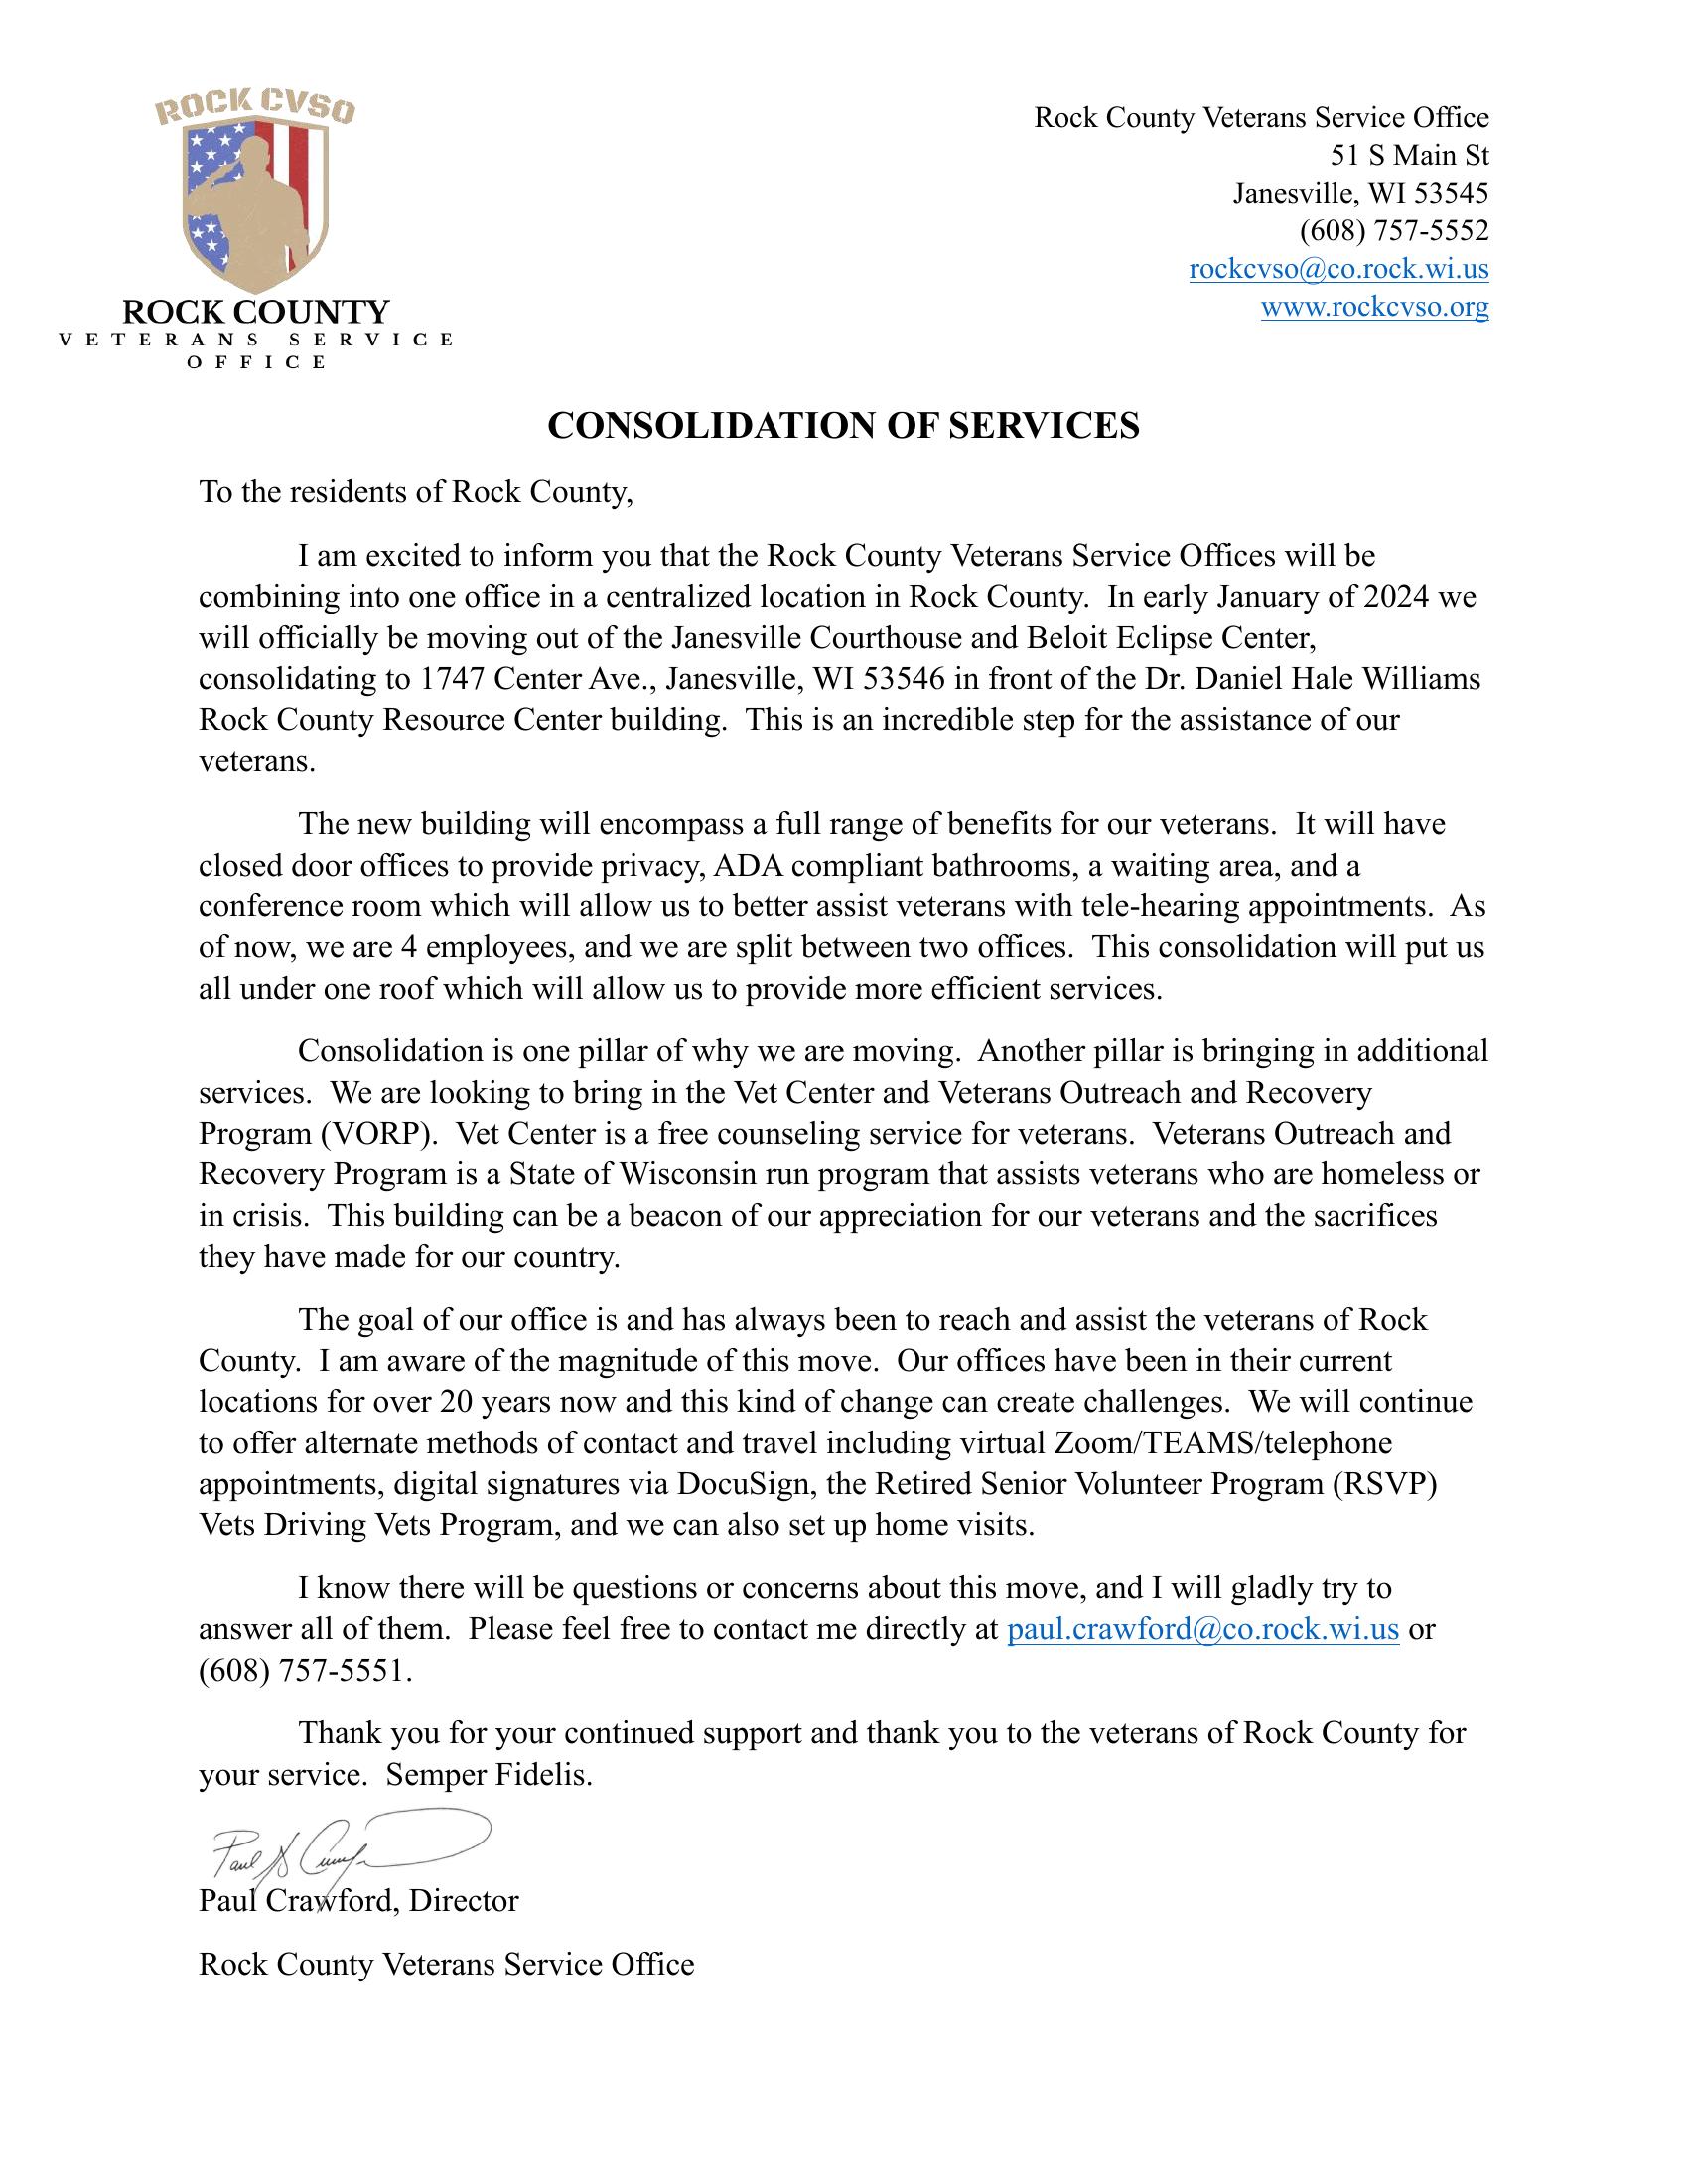 Consolidation Outreach Letter JPG